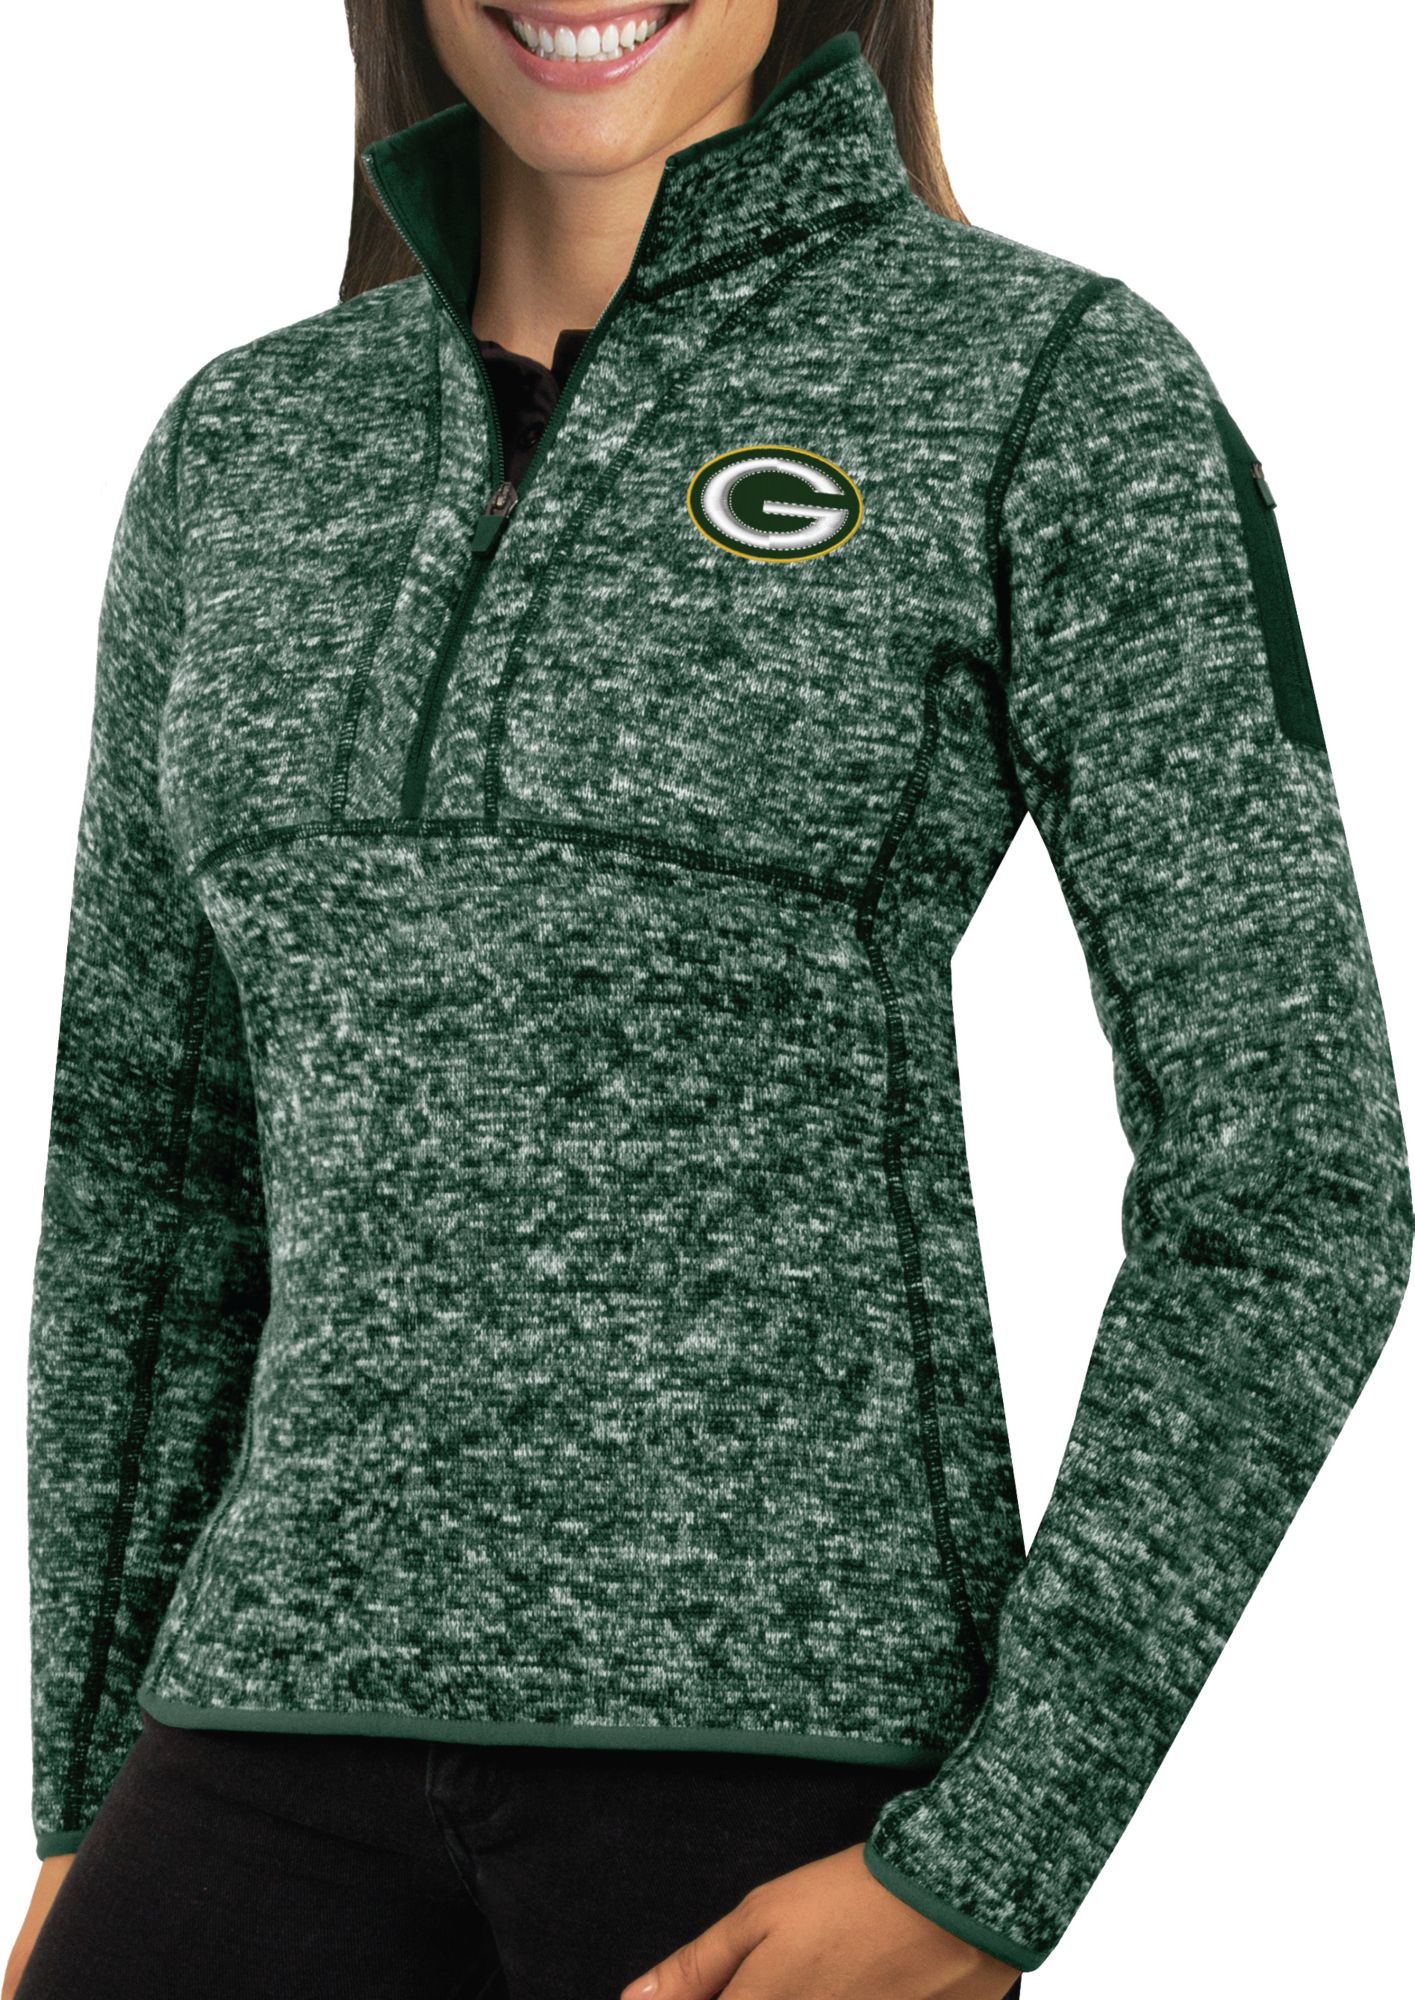 green bay packers clothes near me